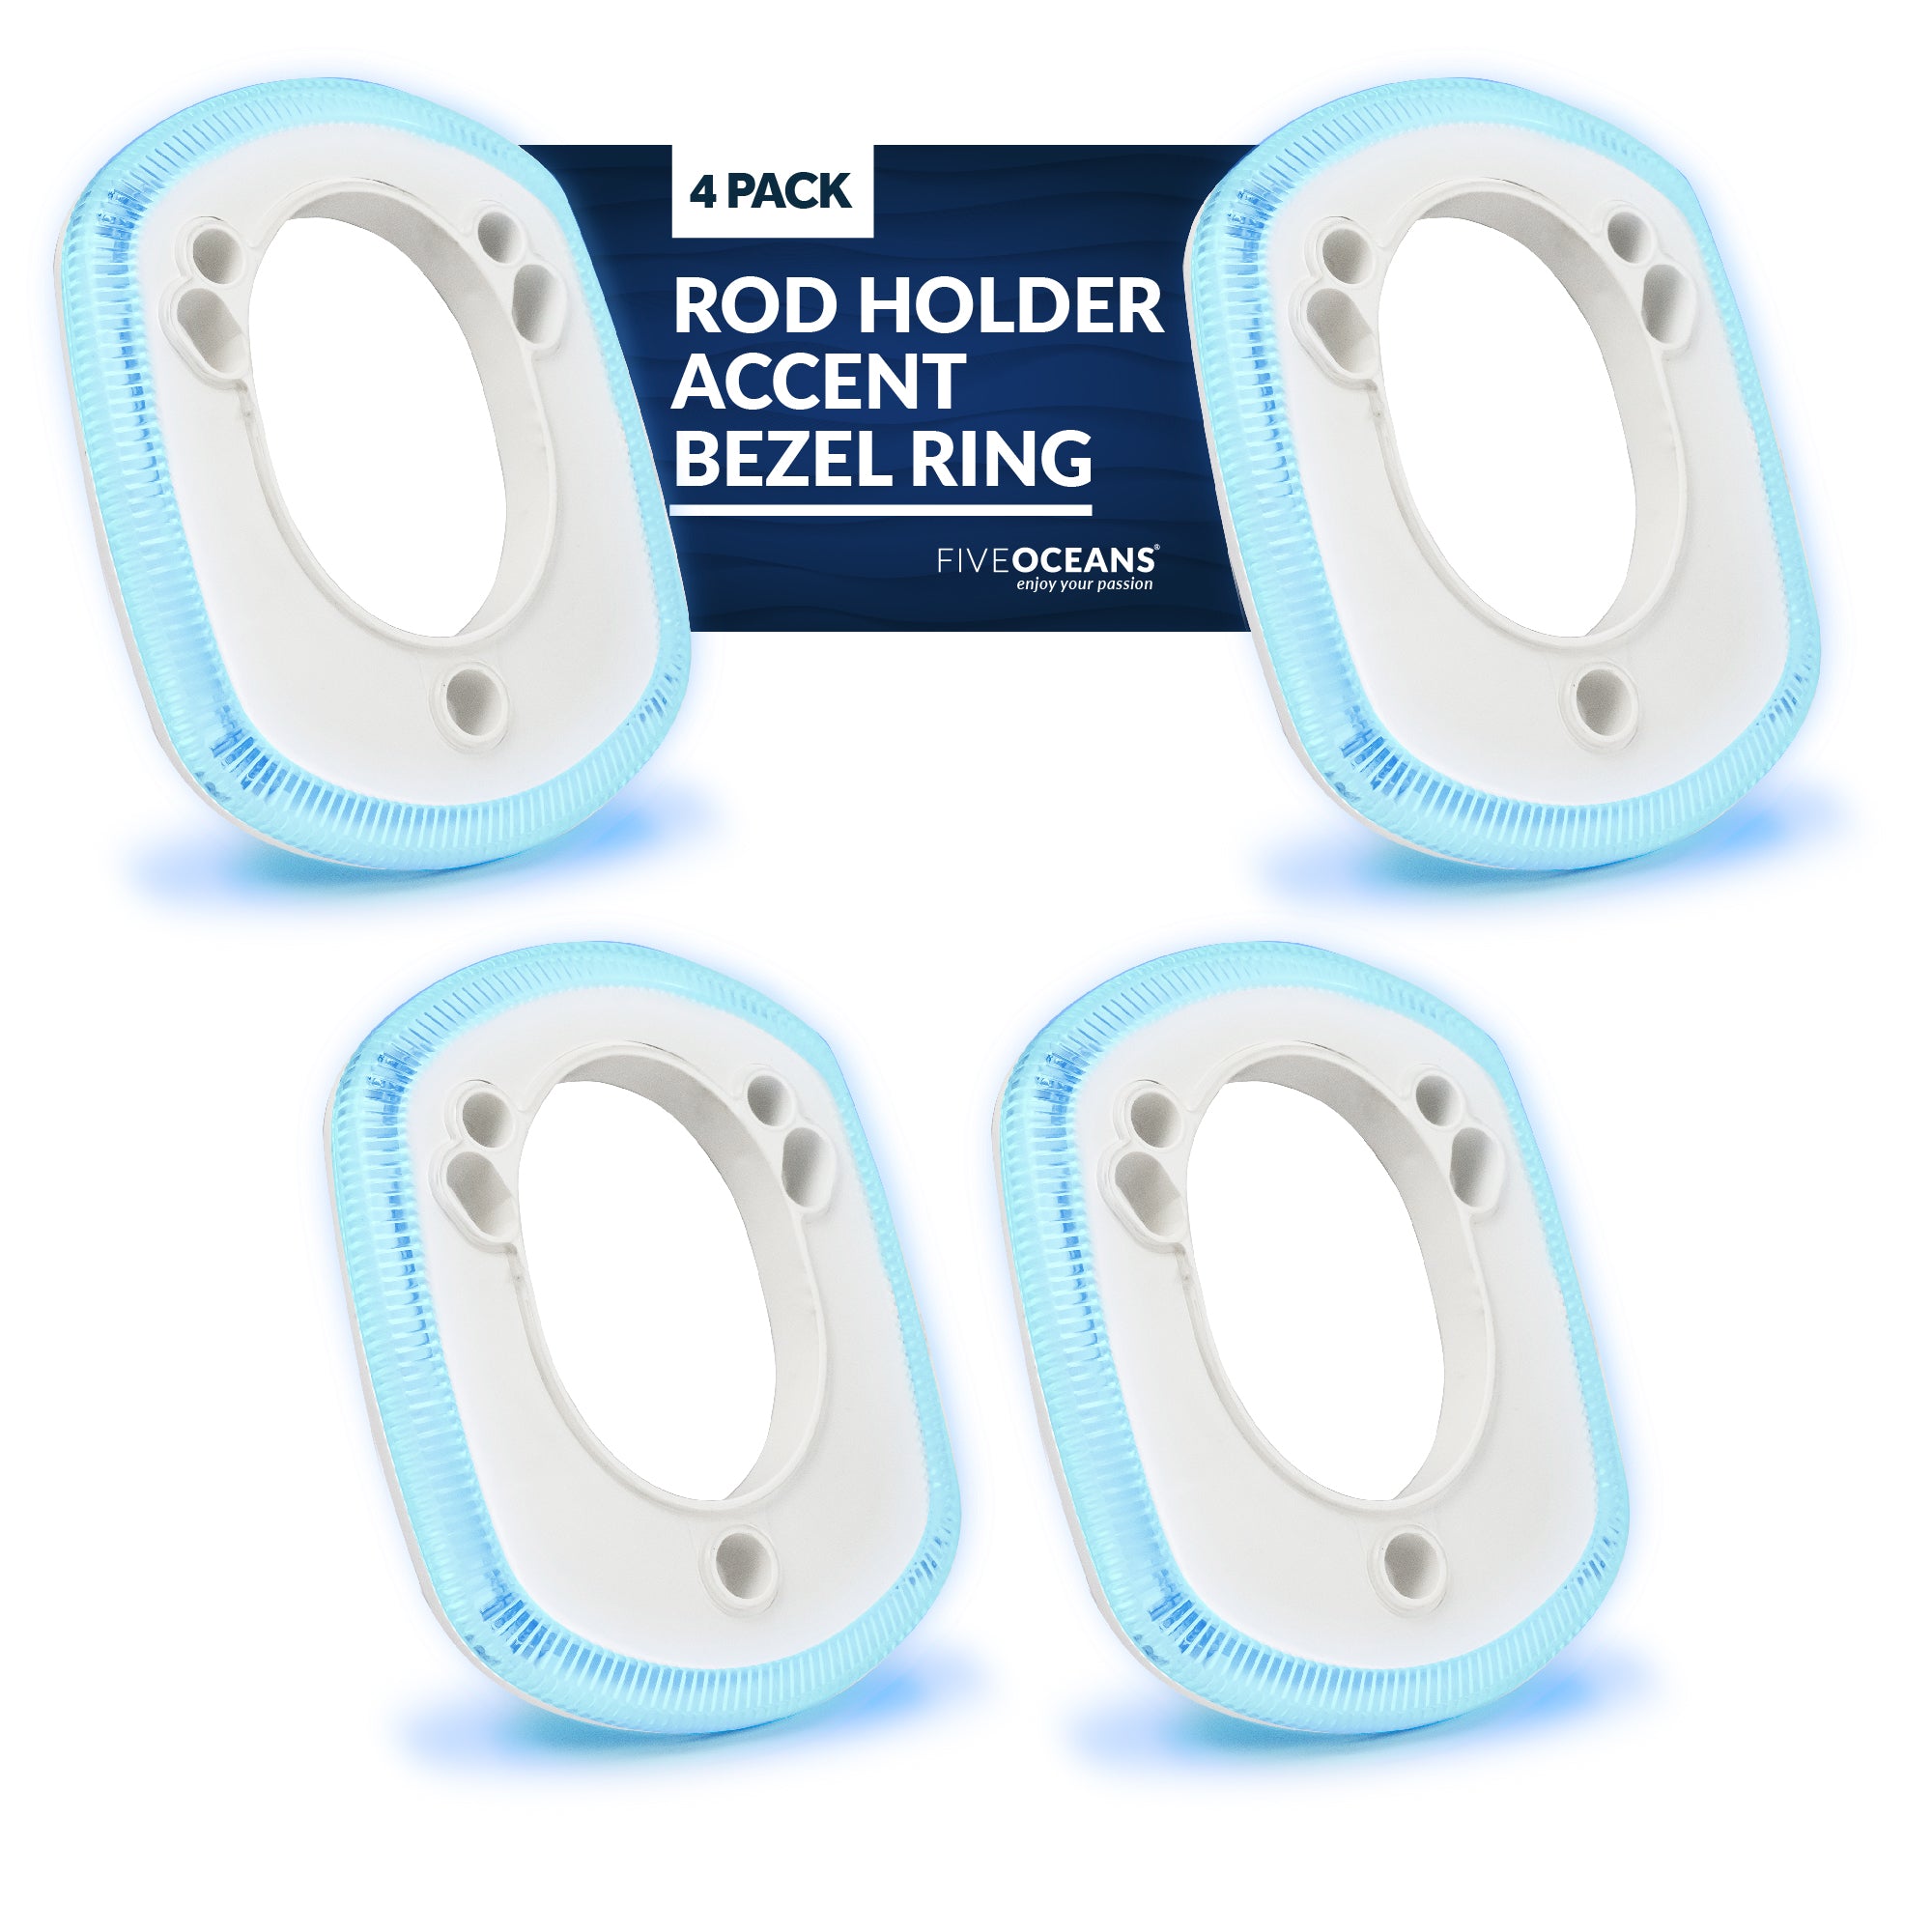 Blue LED Rod Holder Accent Bezel Ring, Fits All Five Oceans/Most Standard Rod Holders, Grade Marine Durable Materials, 12 Volts, 4-Pack, FO-4433-M4